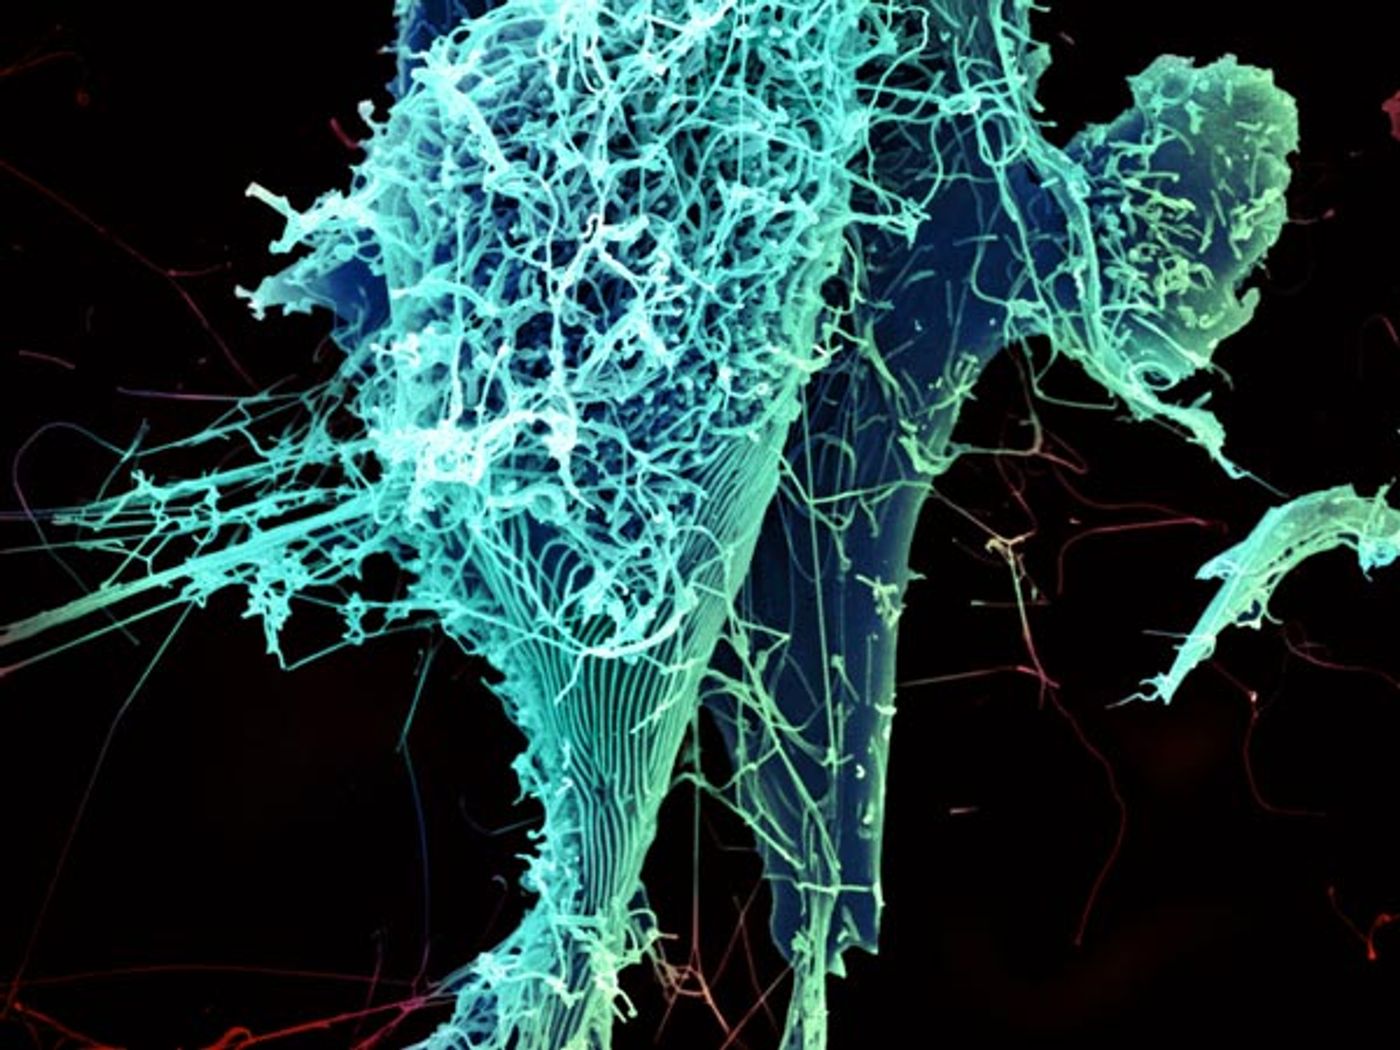 String-like Ebola virus peeling off an infected cell